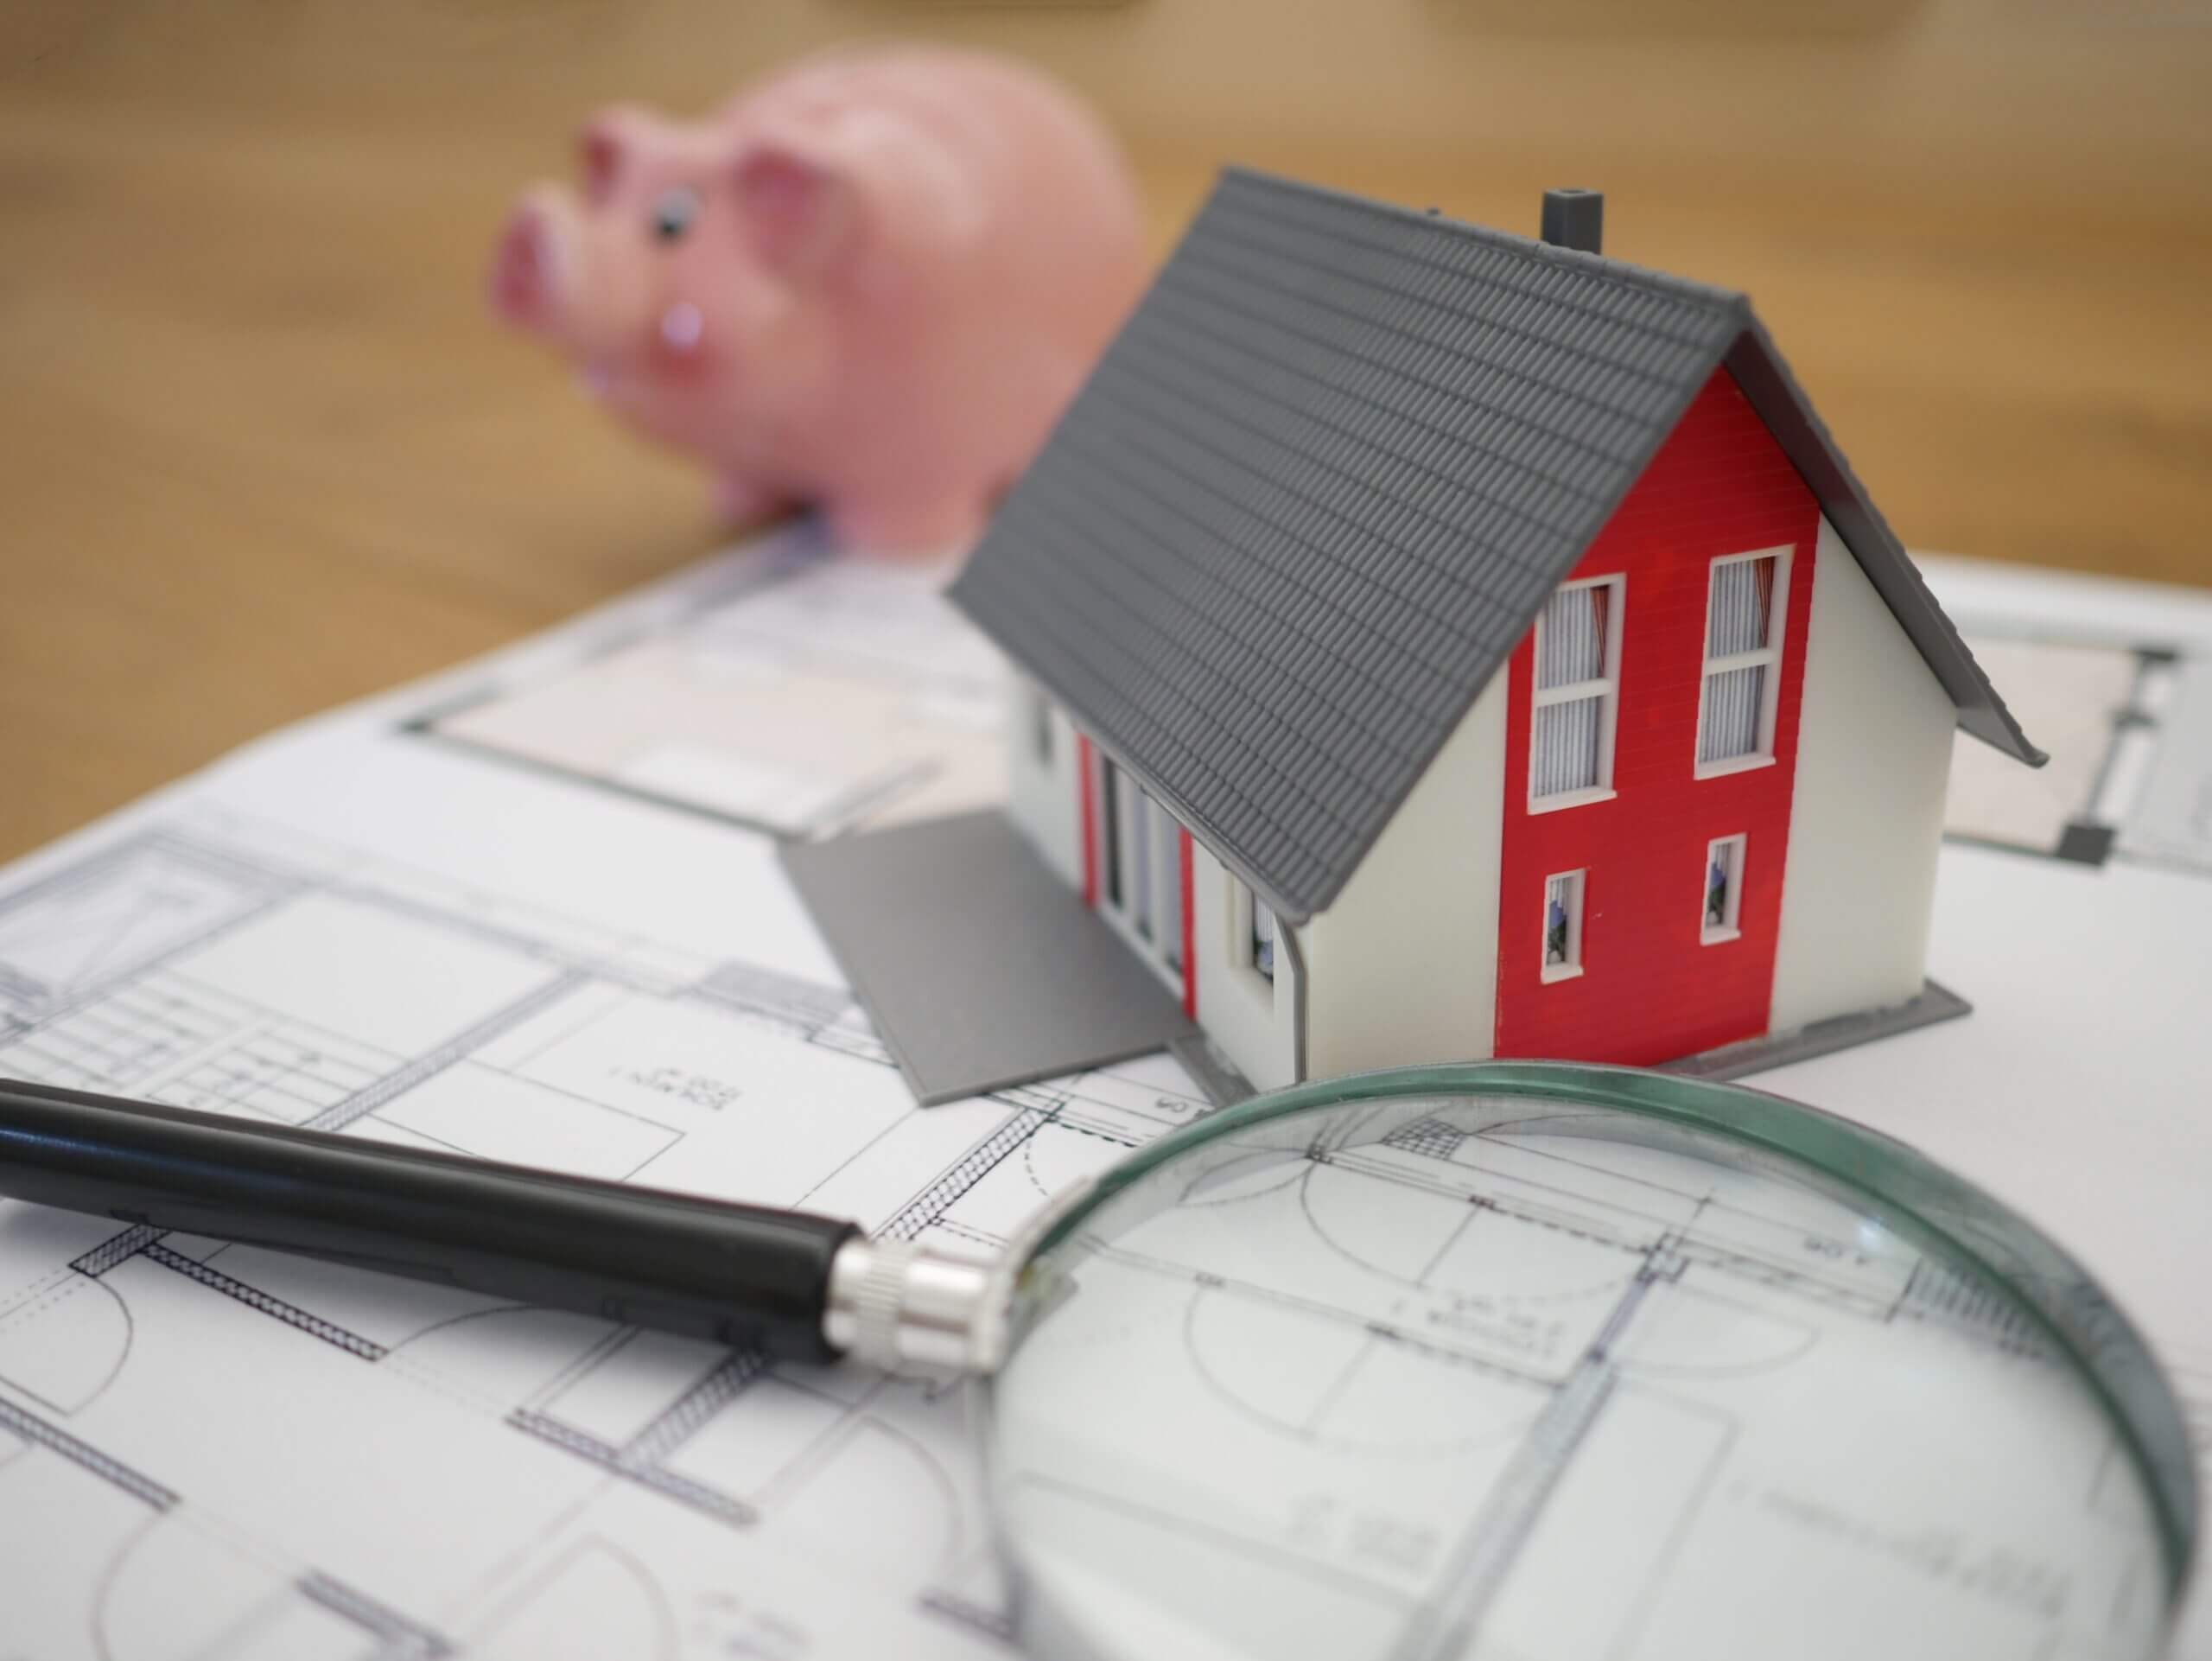 Harris: Learning about home mortgage loans